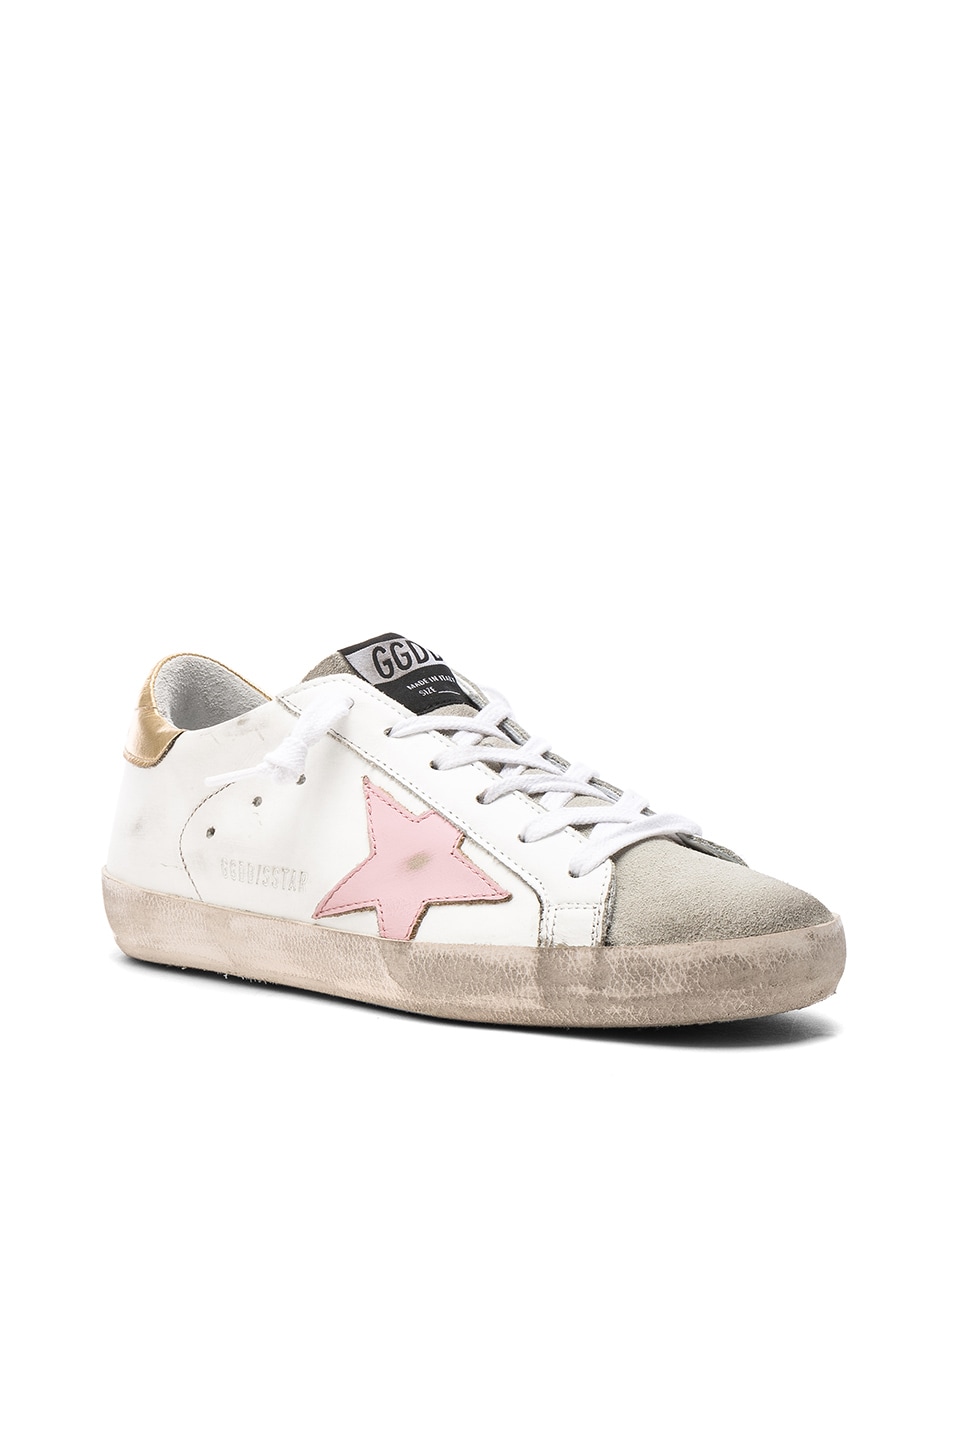 GOLDEN GOOSE Sneakers Superstar In White Leather With Star Pink, Whir ...